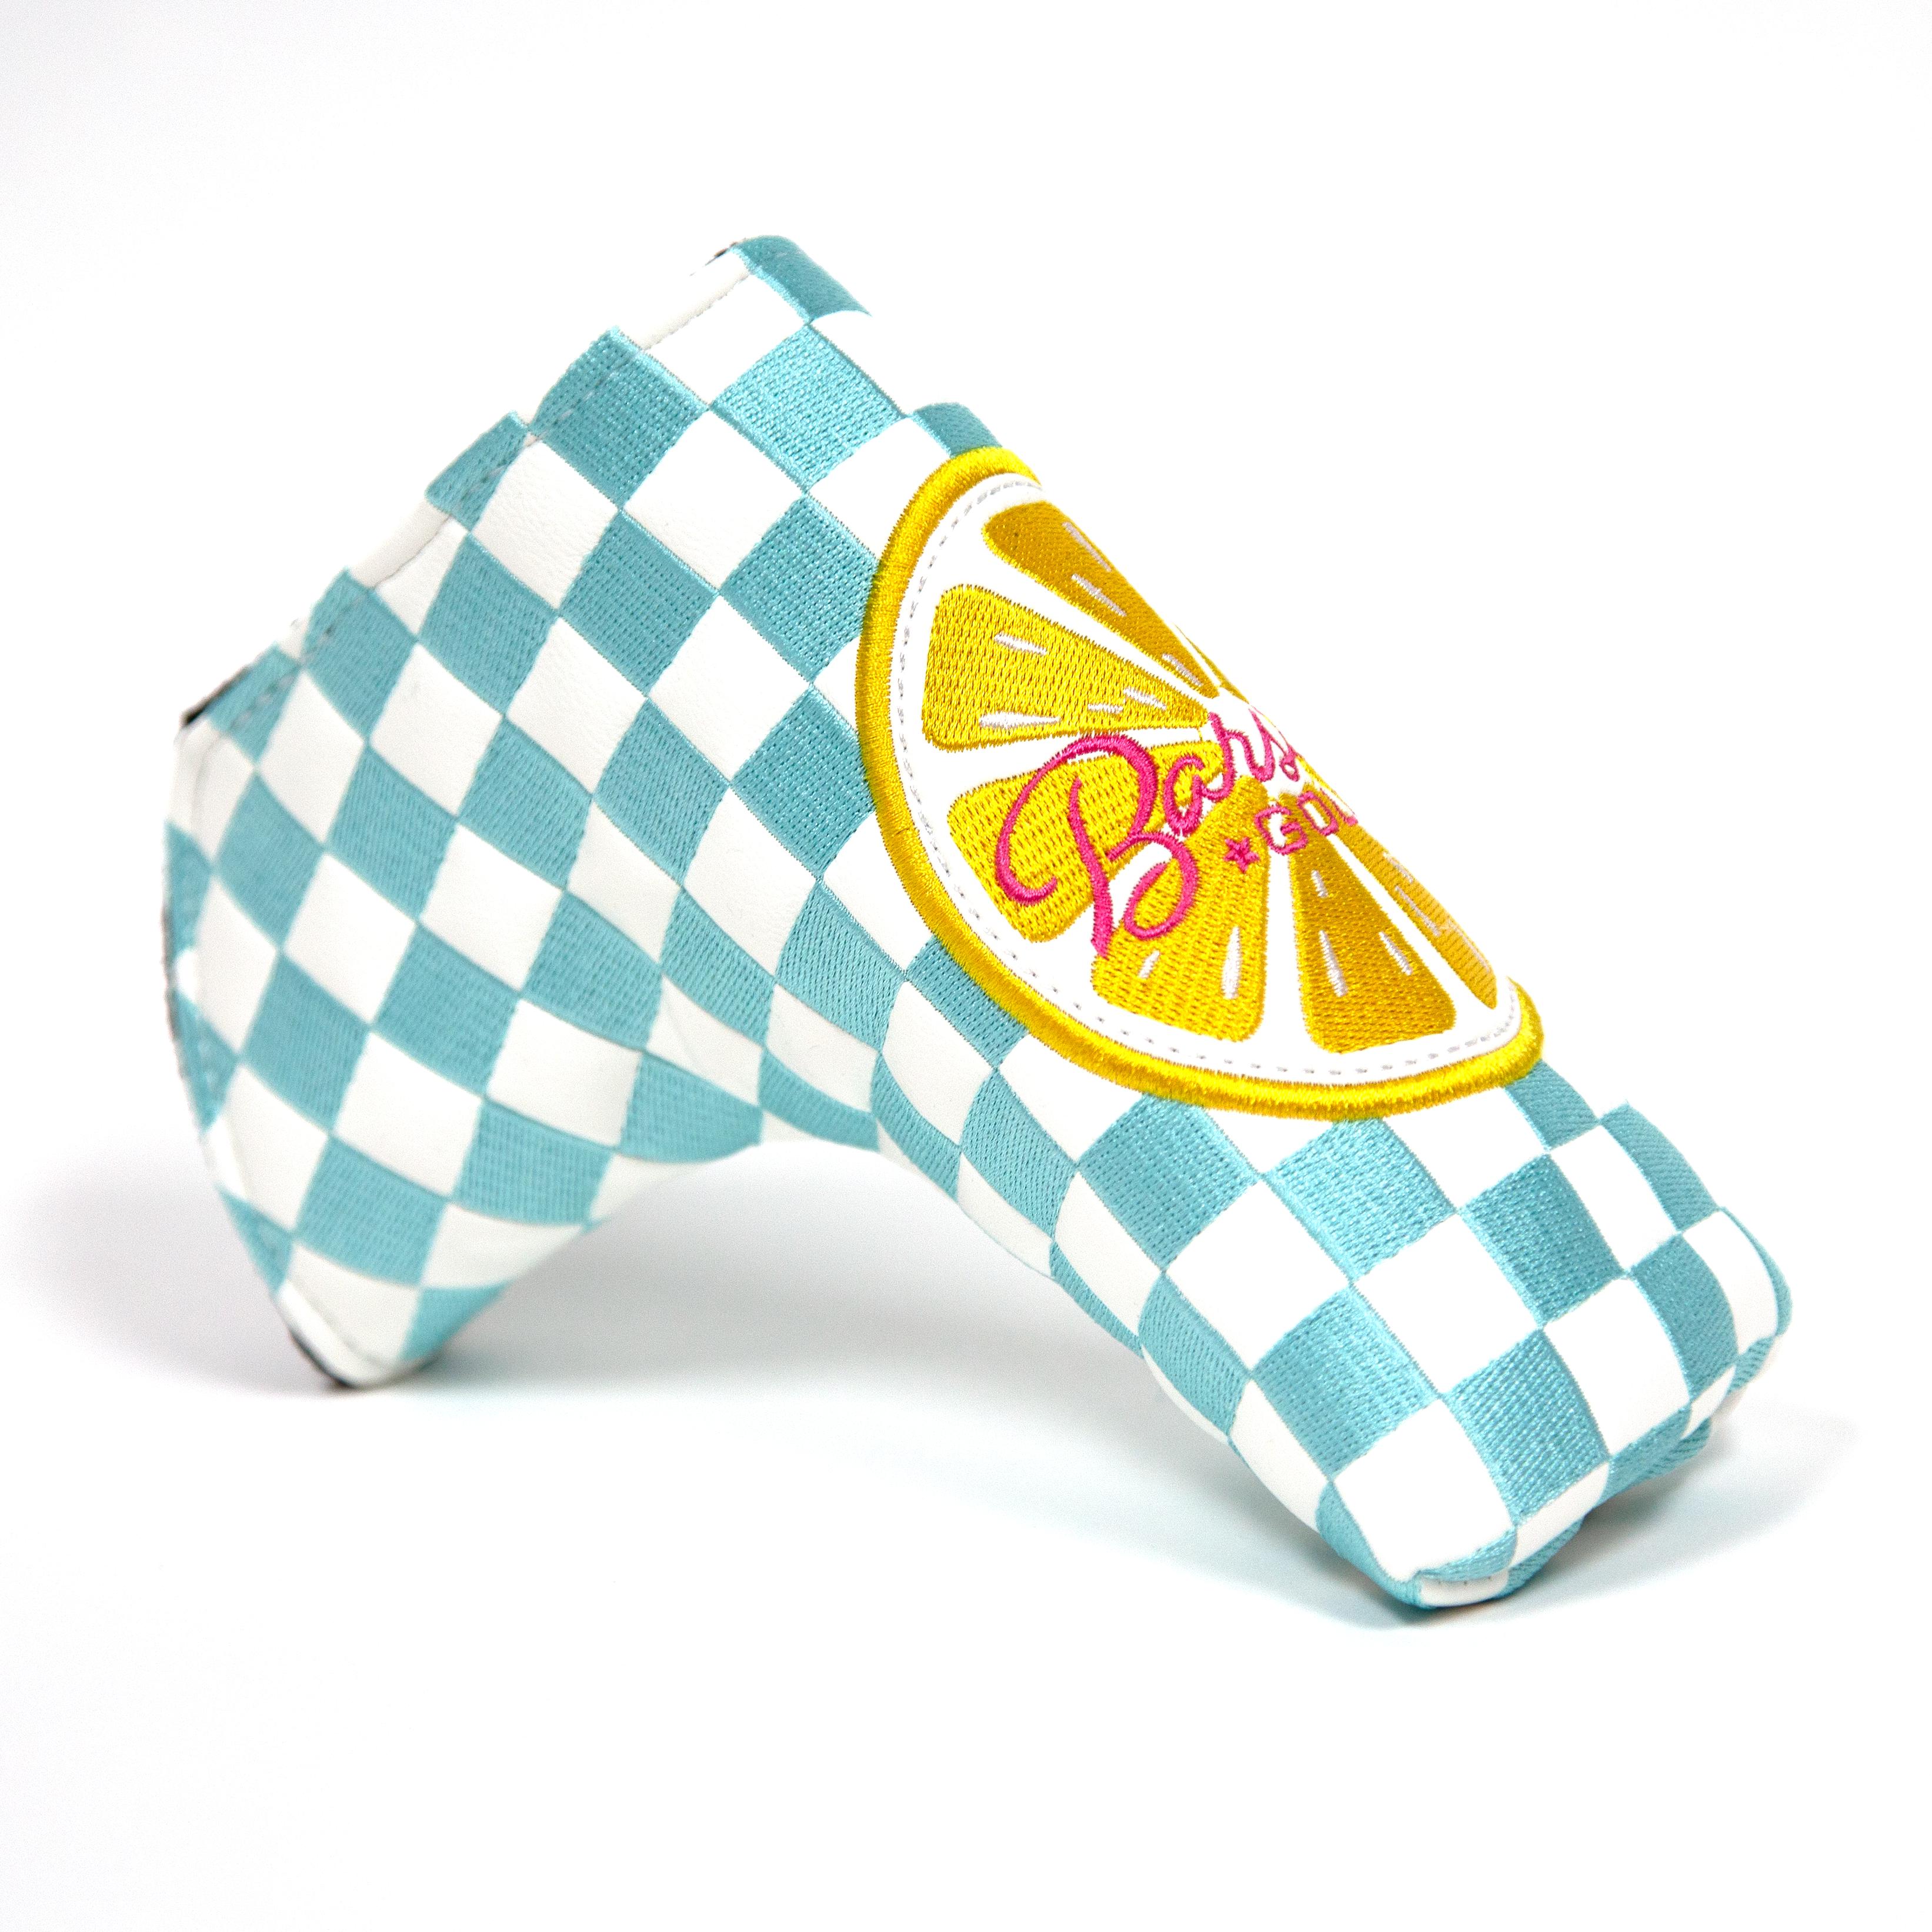 Barstool Golf Checkered Blade Putter Cover-Golf Accessories-Fore Play-Teal-One Size-Barstool Sports